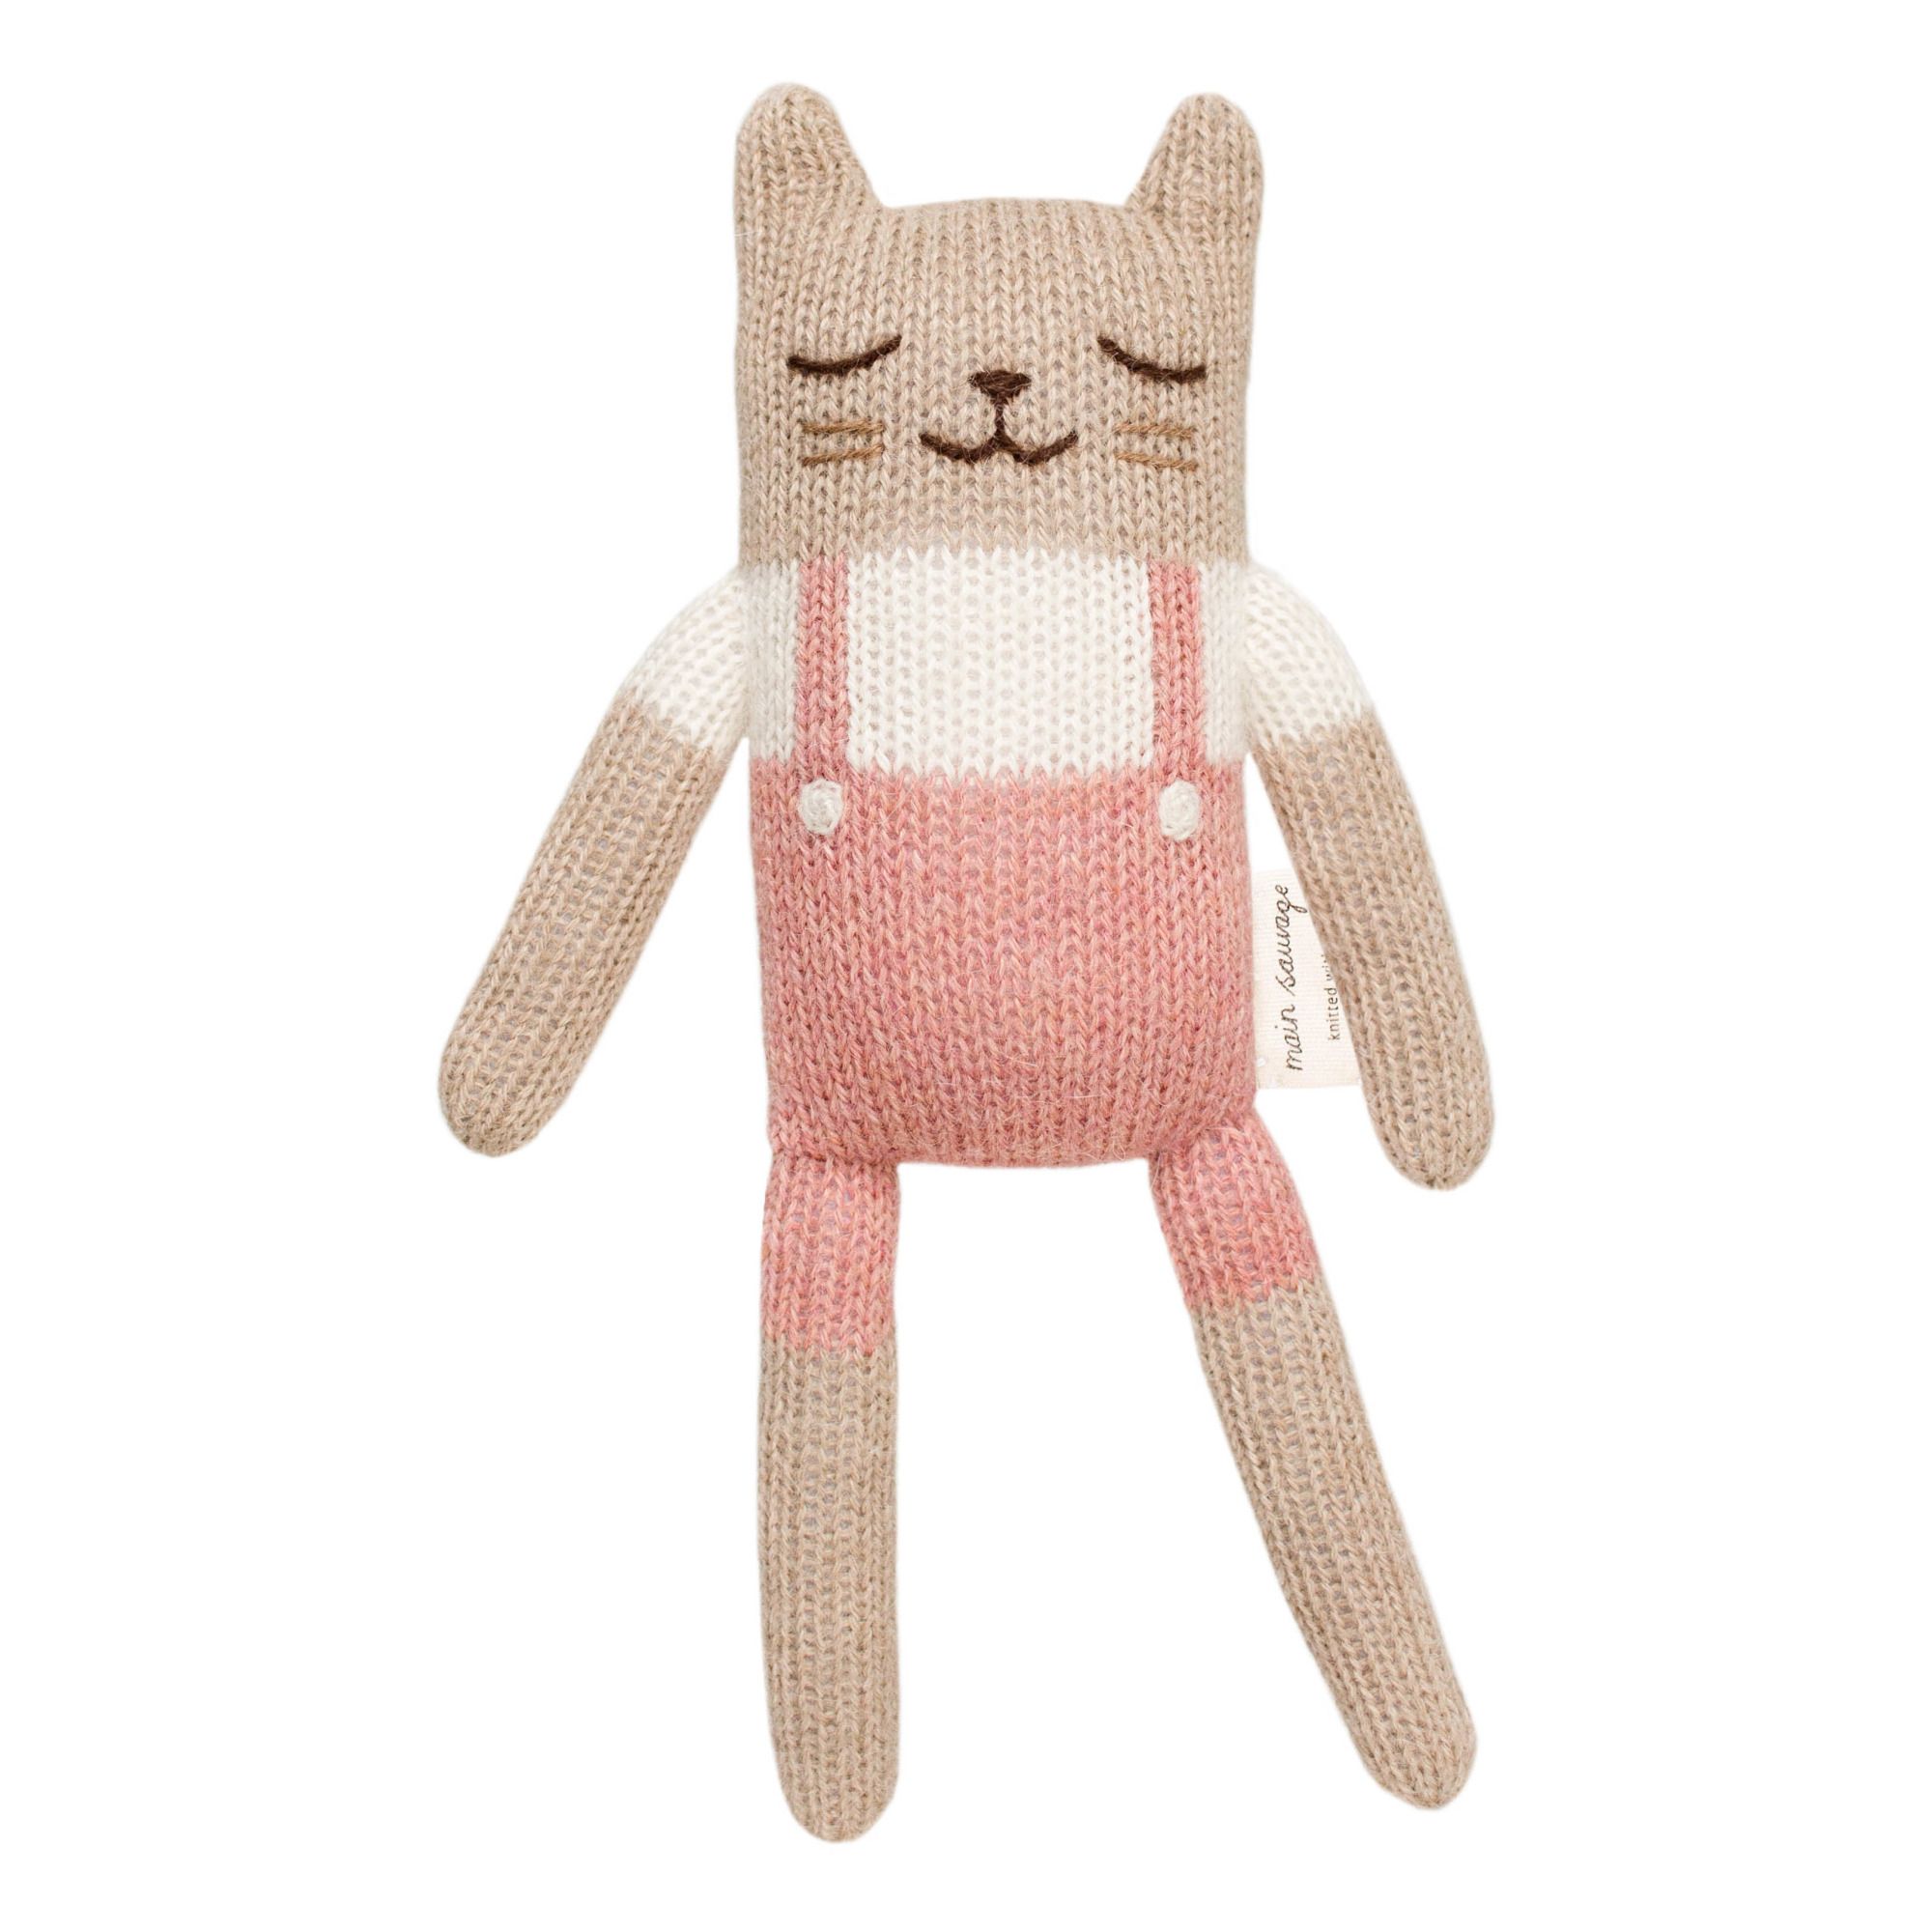 Main Sauvage - Doudou Chat - Rose